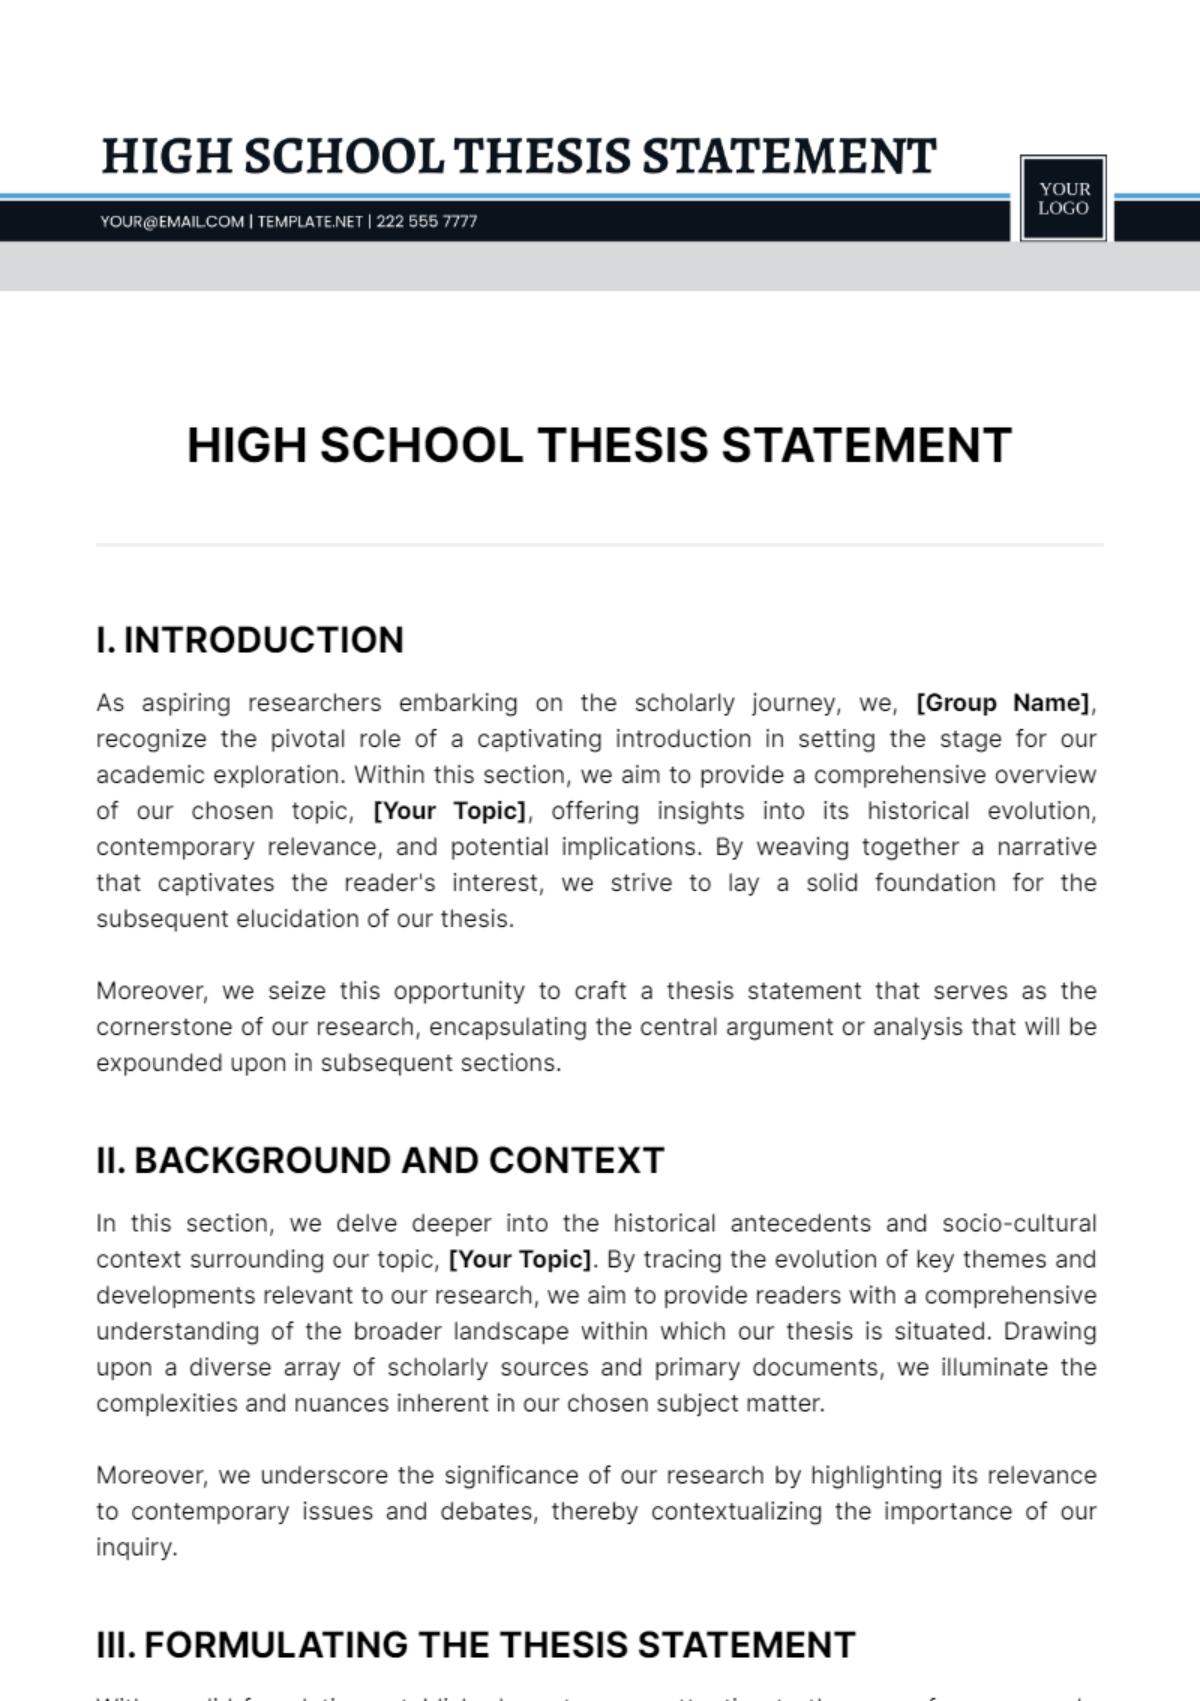 High School Thesis Statement Template